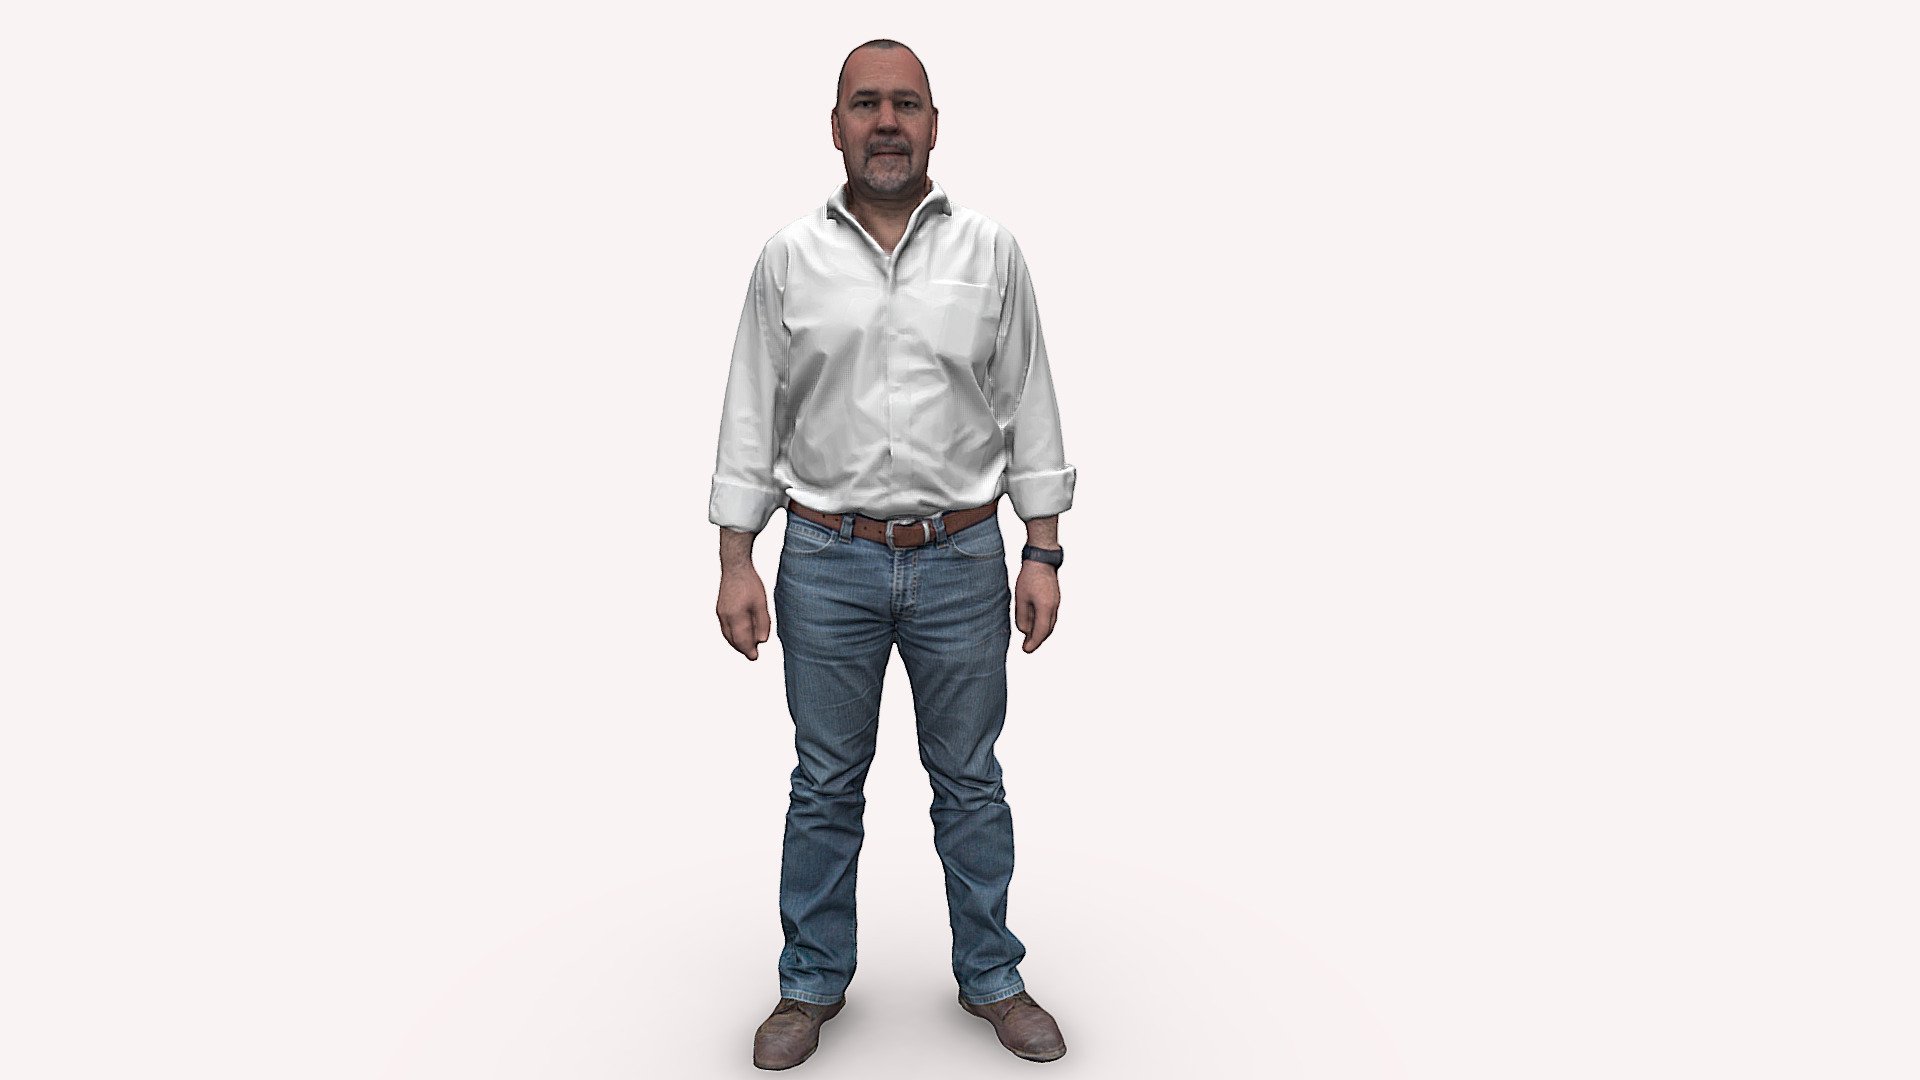 Mark Clews ITG - Mark Clews - 3D model by Europac3d 3d model